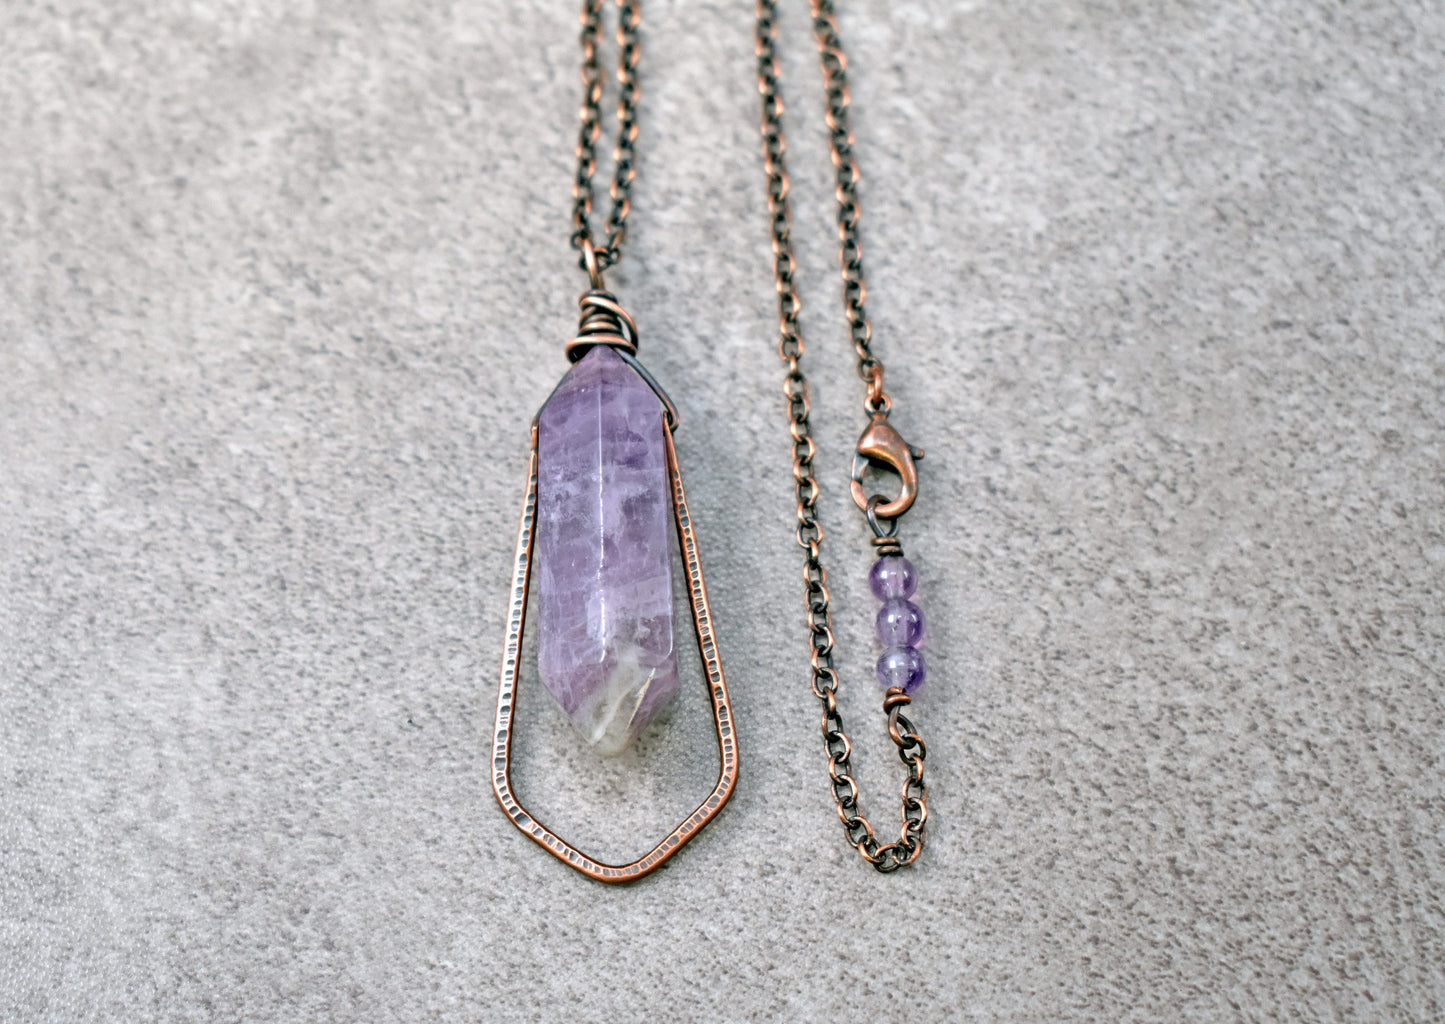 Double Terminated Amethyst Point Necklace, Rustic Artisan Copper Pendant, Natural Purple Gemstone Jewelry, Unique Crystal